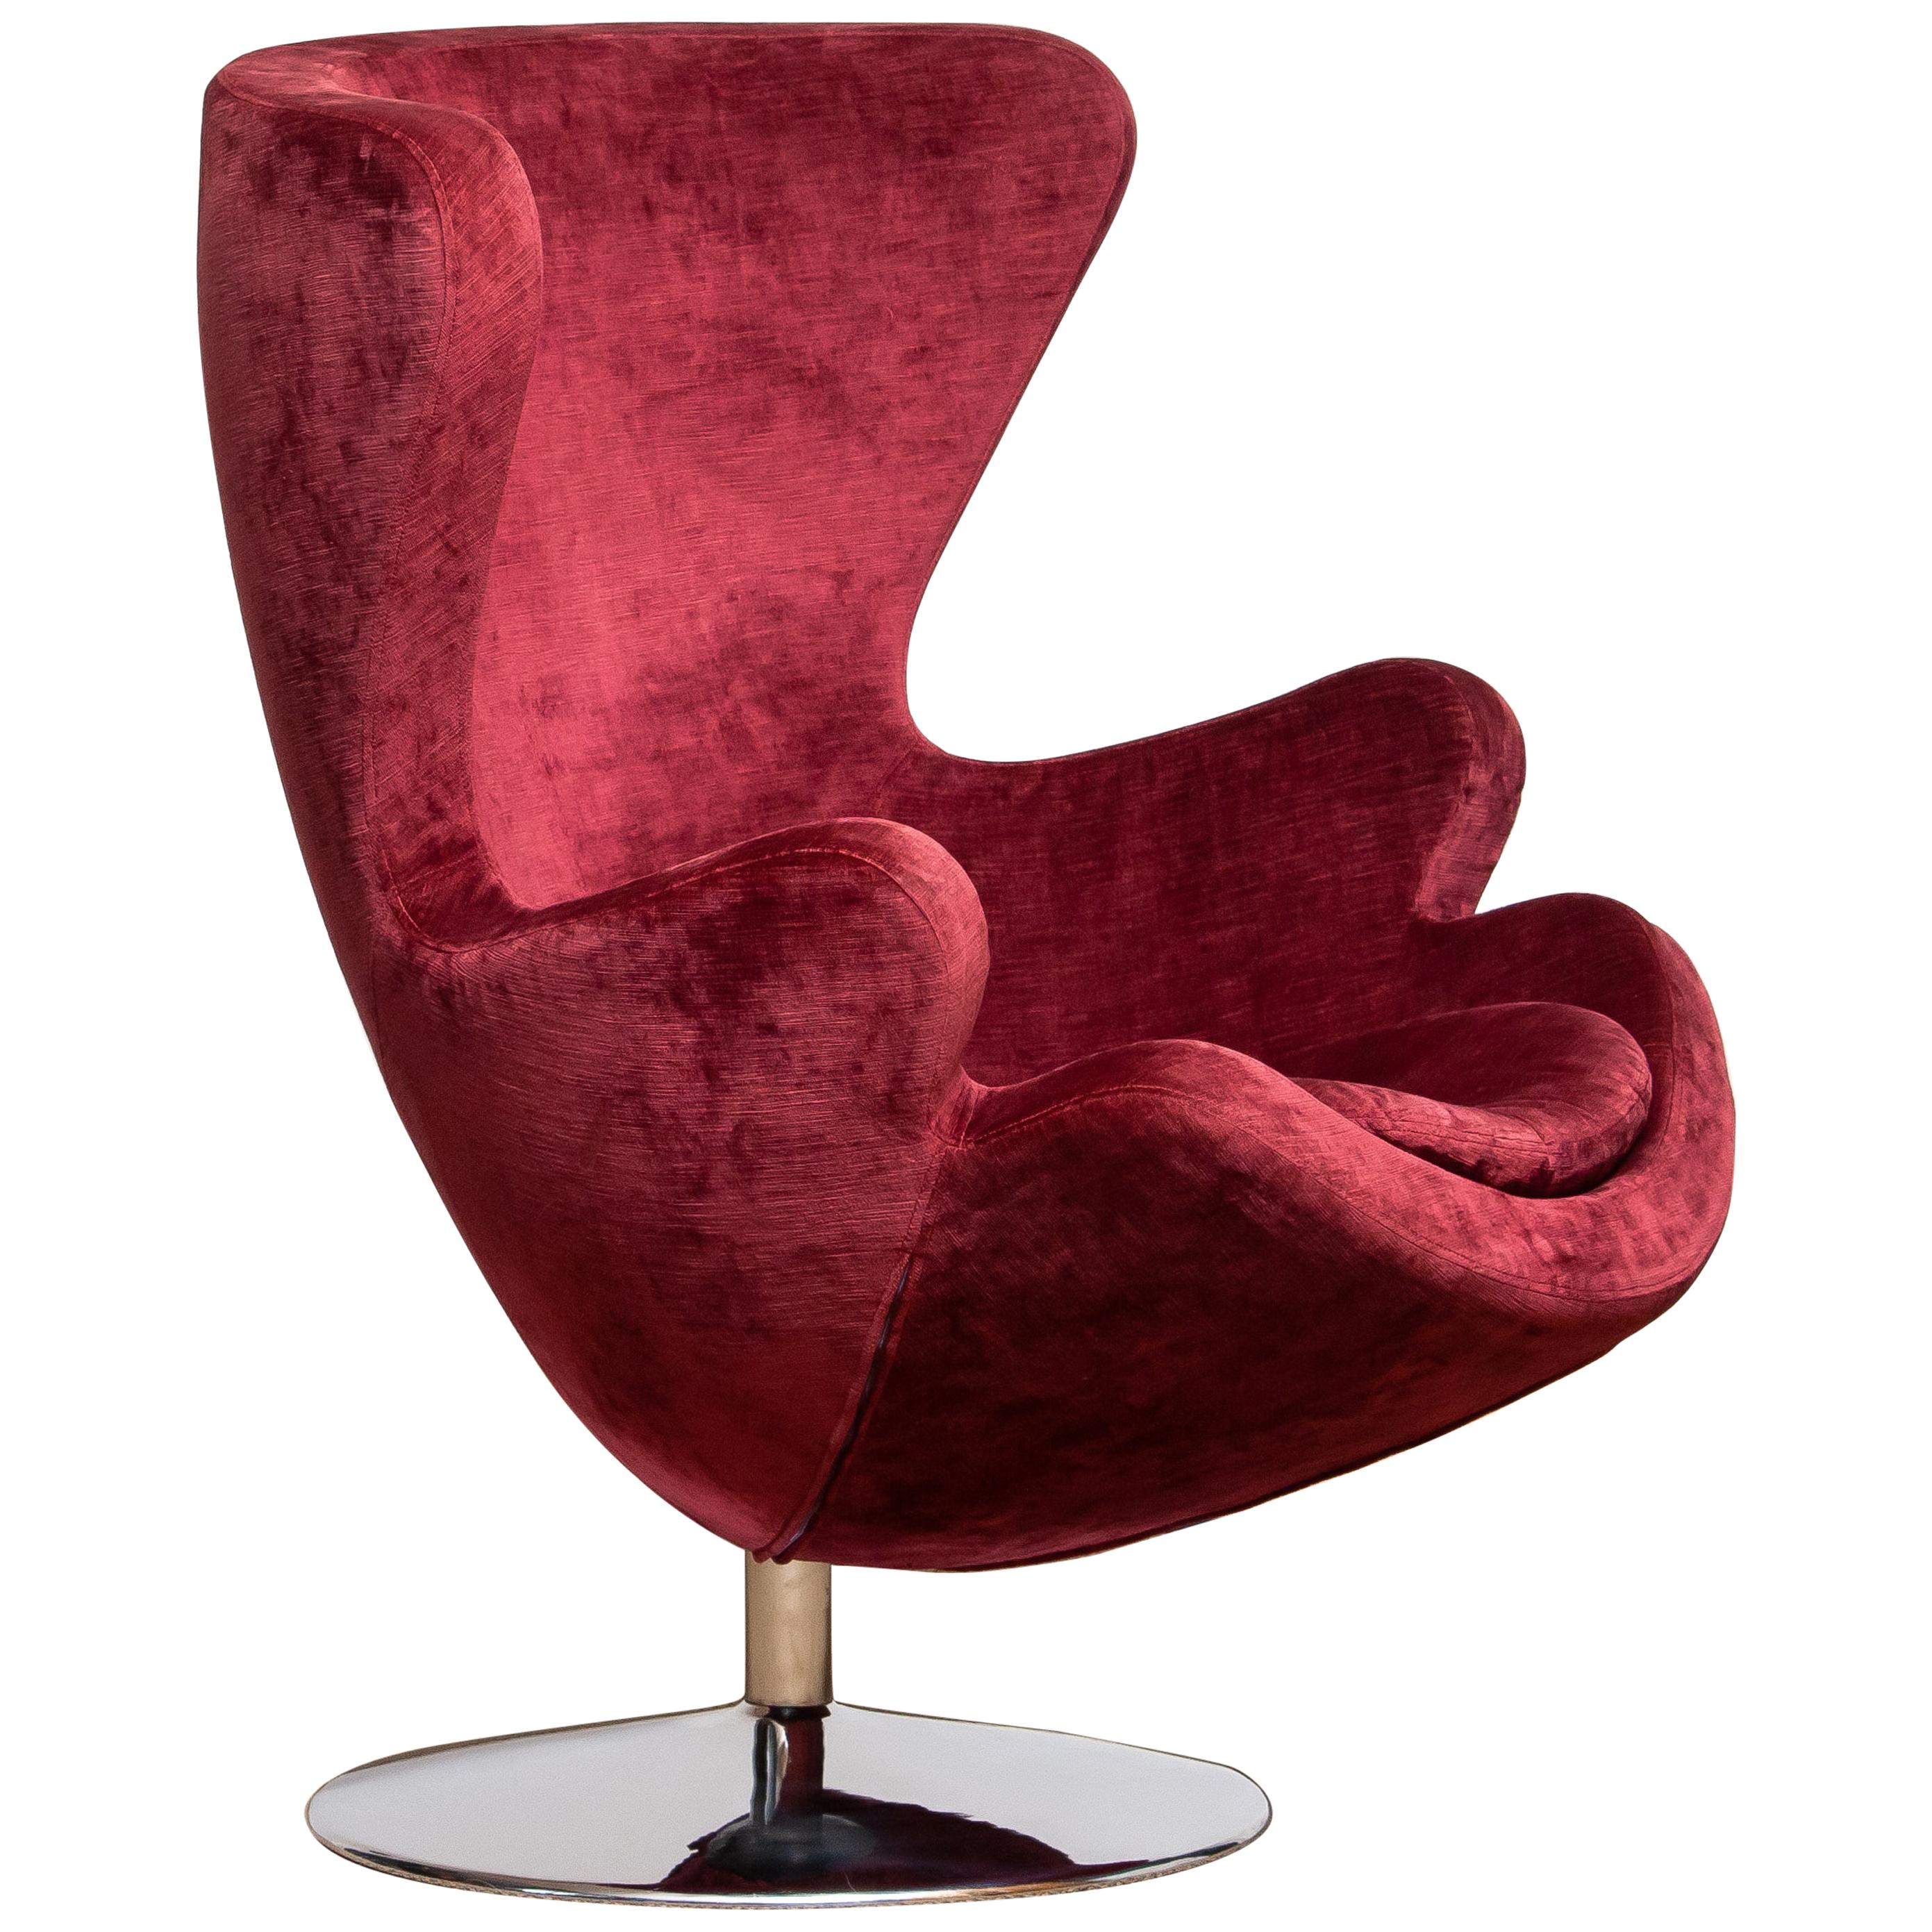 1970s Swivel Lounge Egg Chair on Chrome Stand in Bordeaux Red